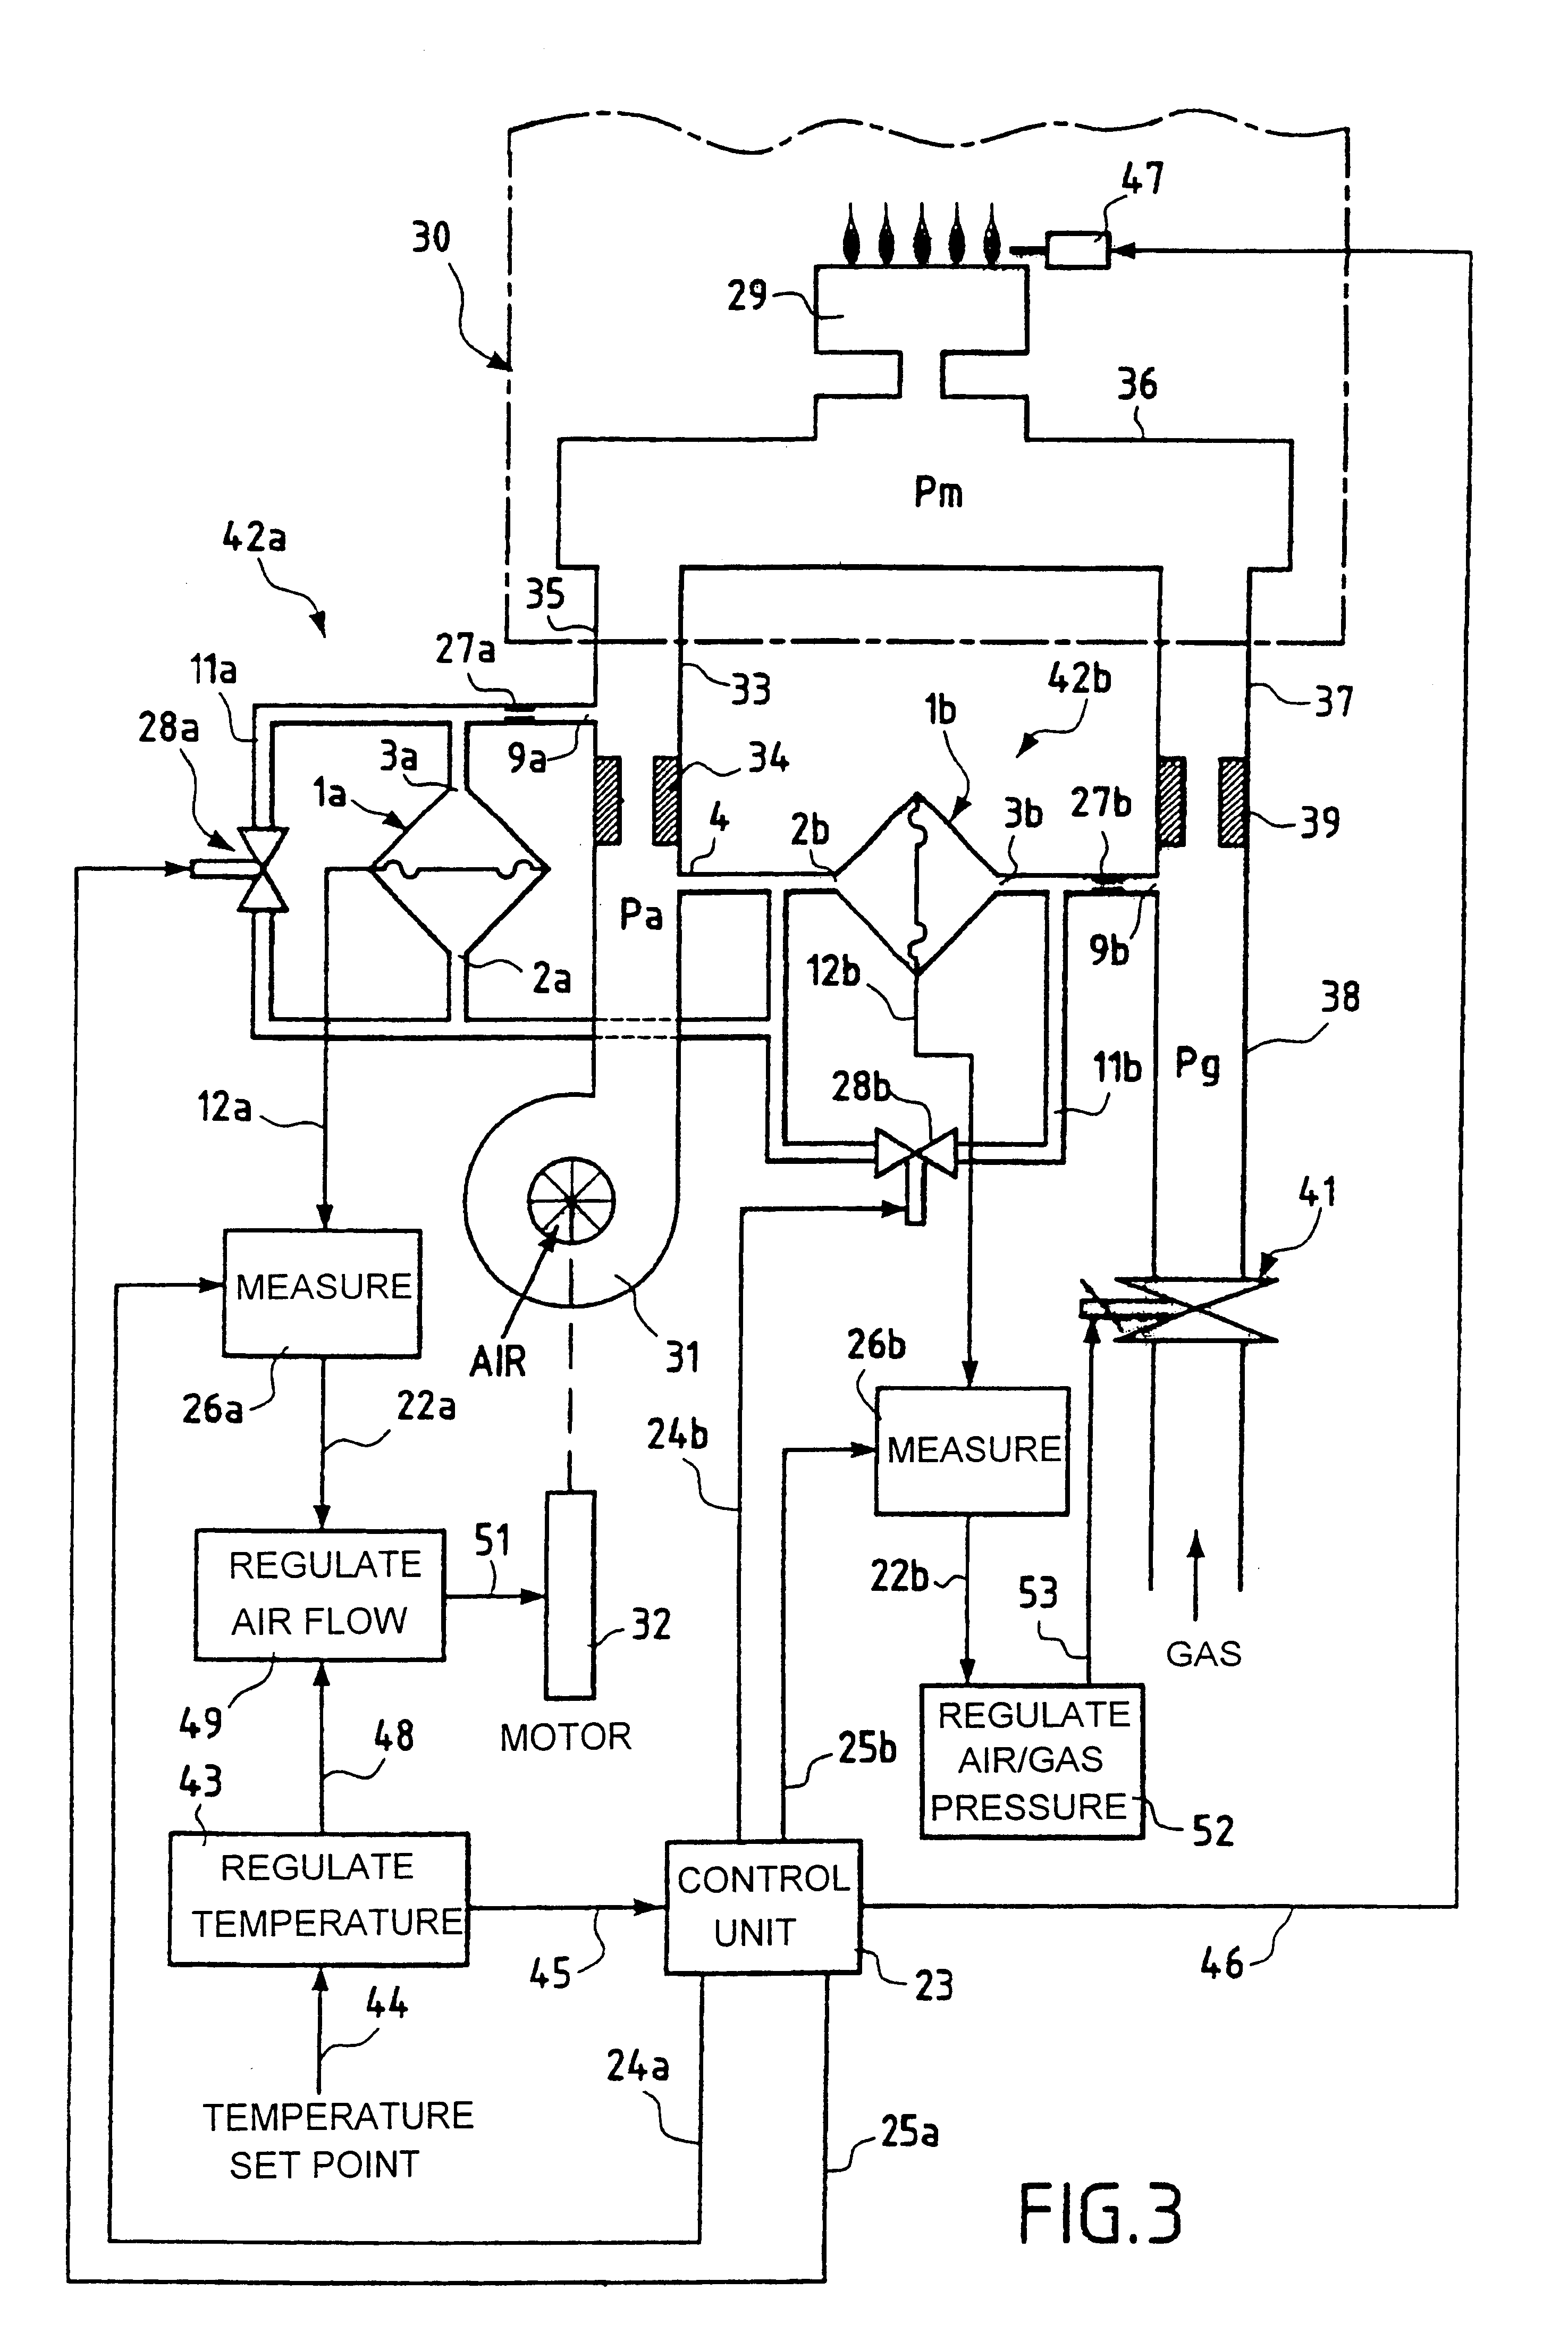 System for active regulation of the air/gas ratio of a burner including a differential pressure measuring system